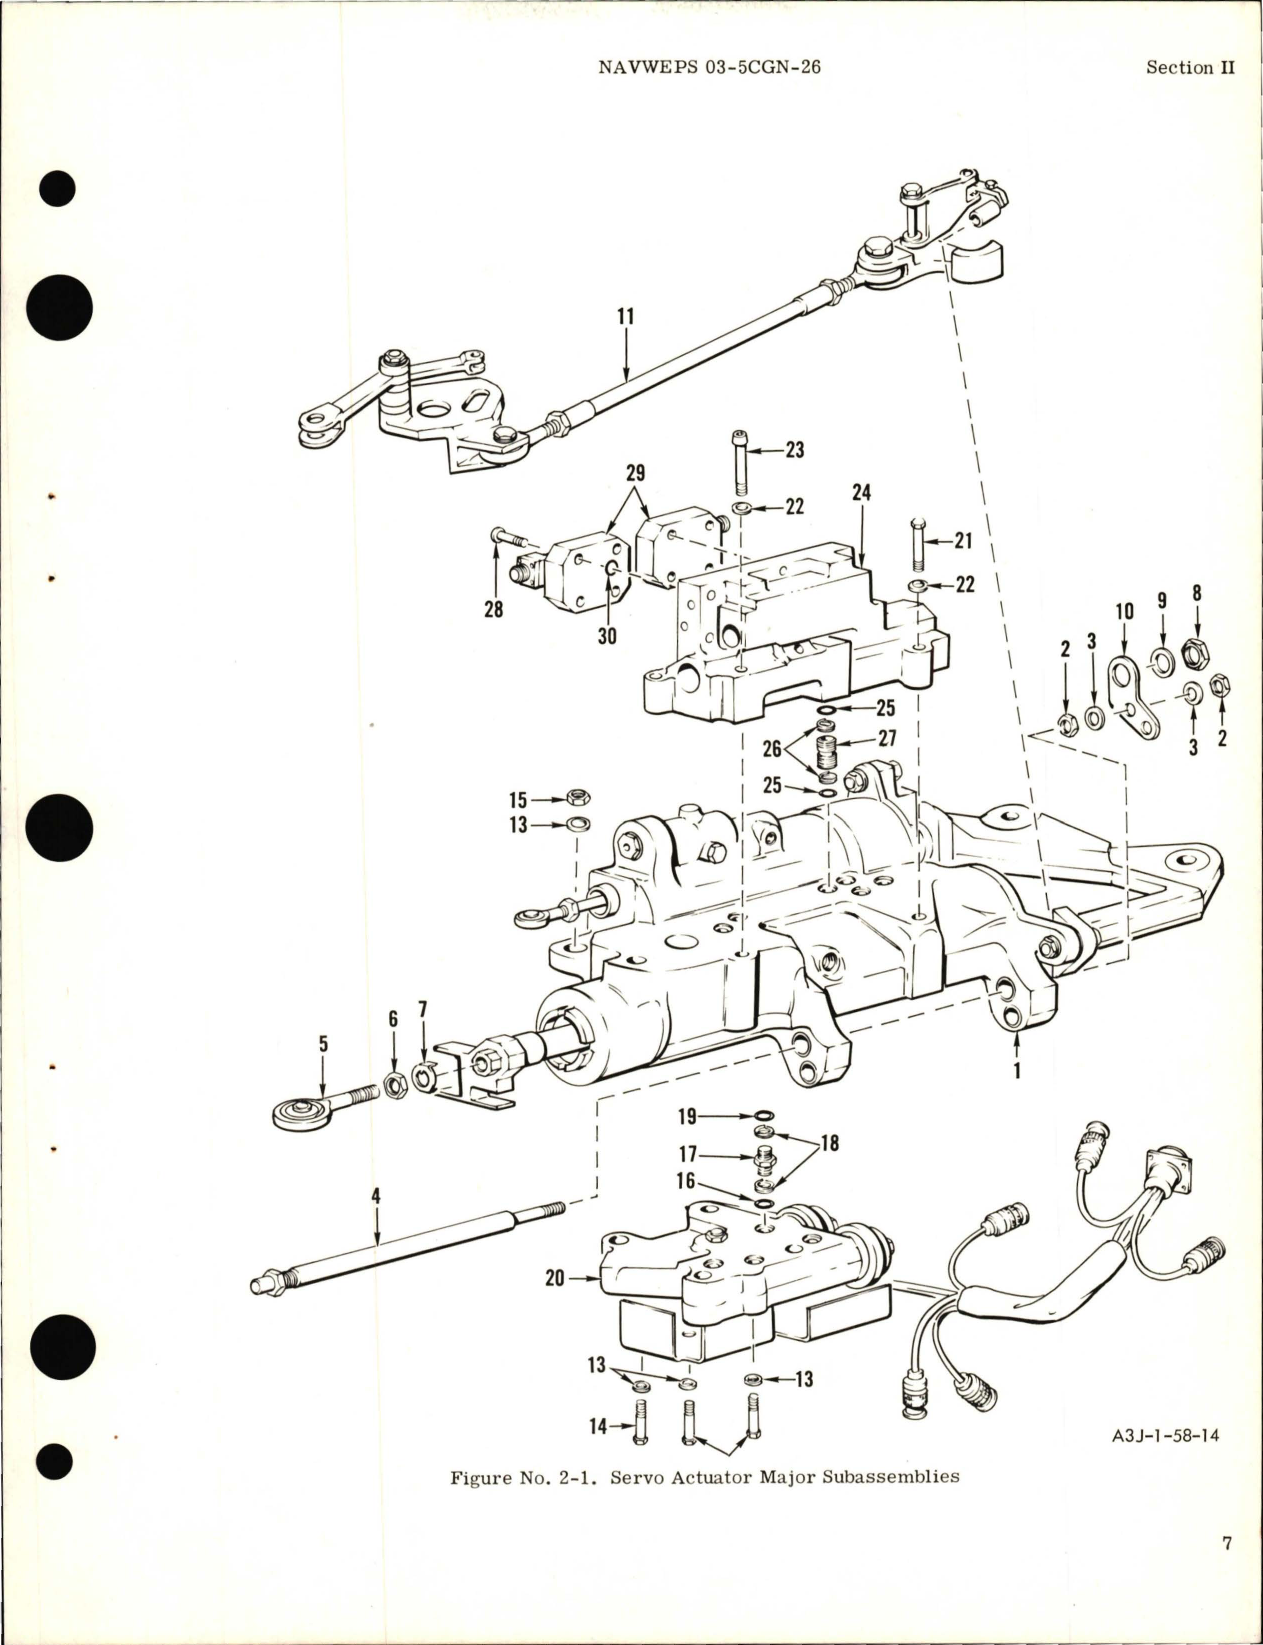 Sample page 9 from AirCorps Library document: Overhaul Instructions for Hydraulic Flight Control Horizontal Stabilizer Series Servo Actuator Assembly - Part 247-58718-51